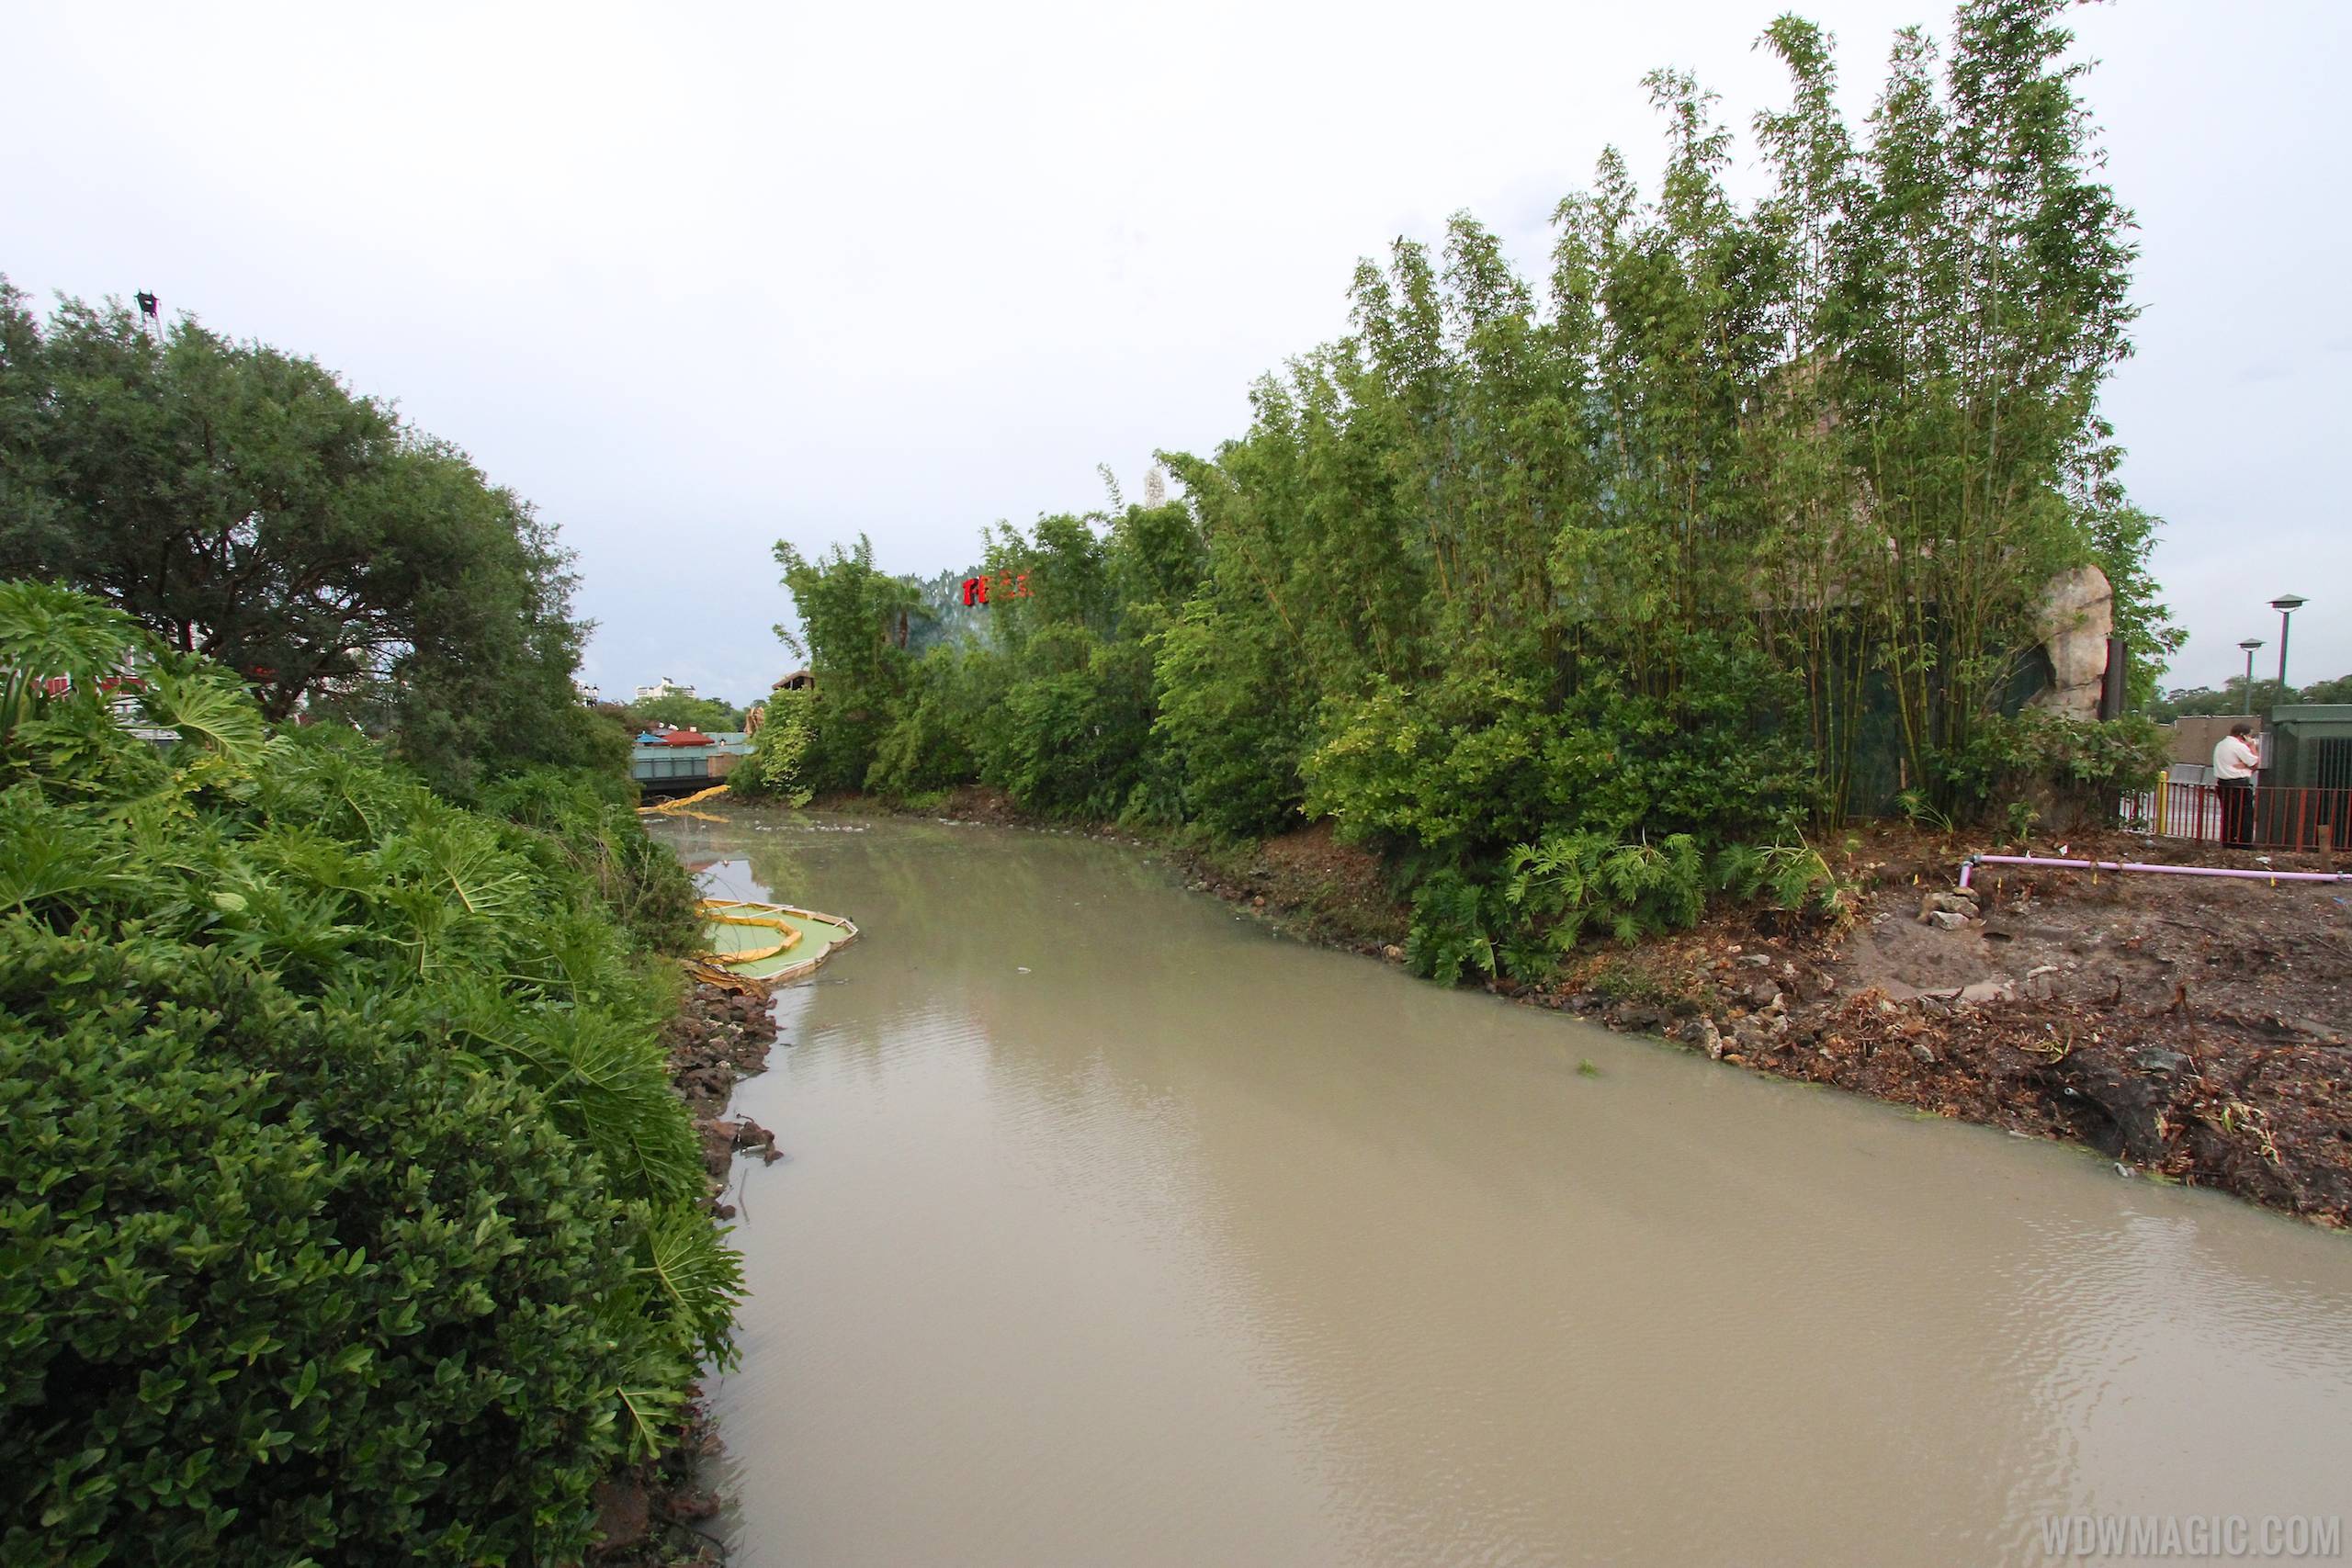 PHOTOS - Waterway removal now underway at the former Pleasure Island area